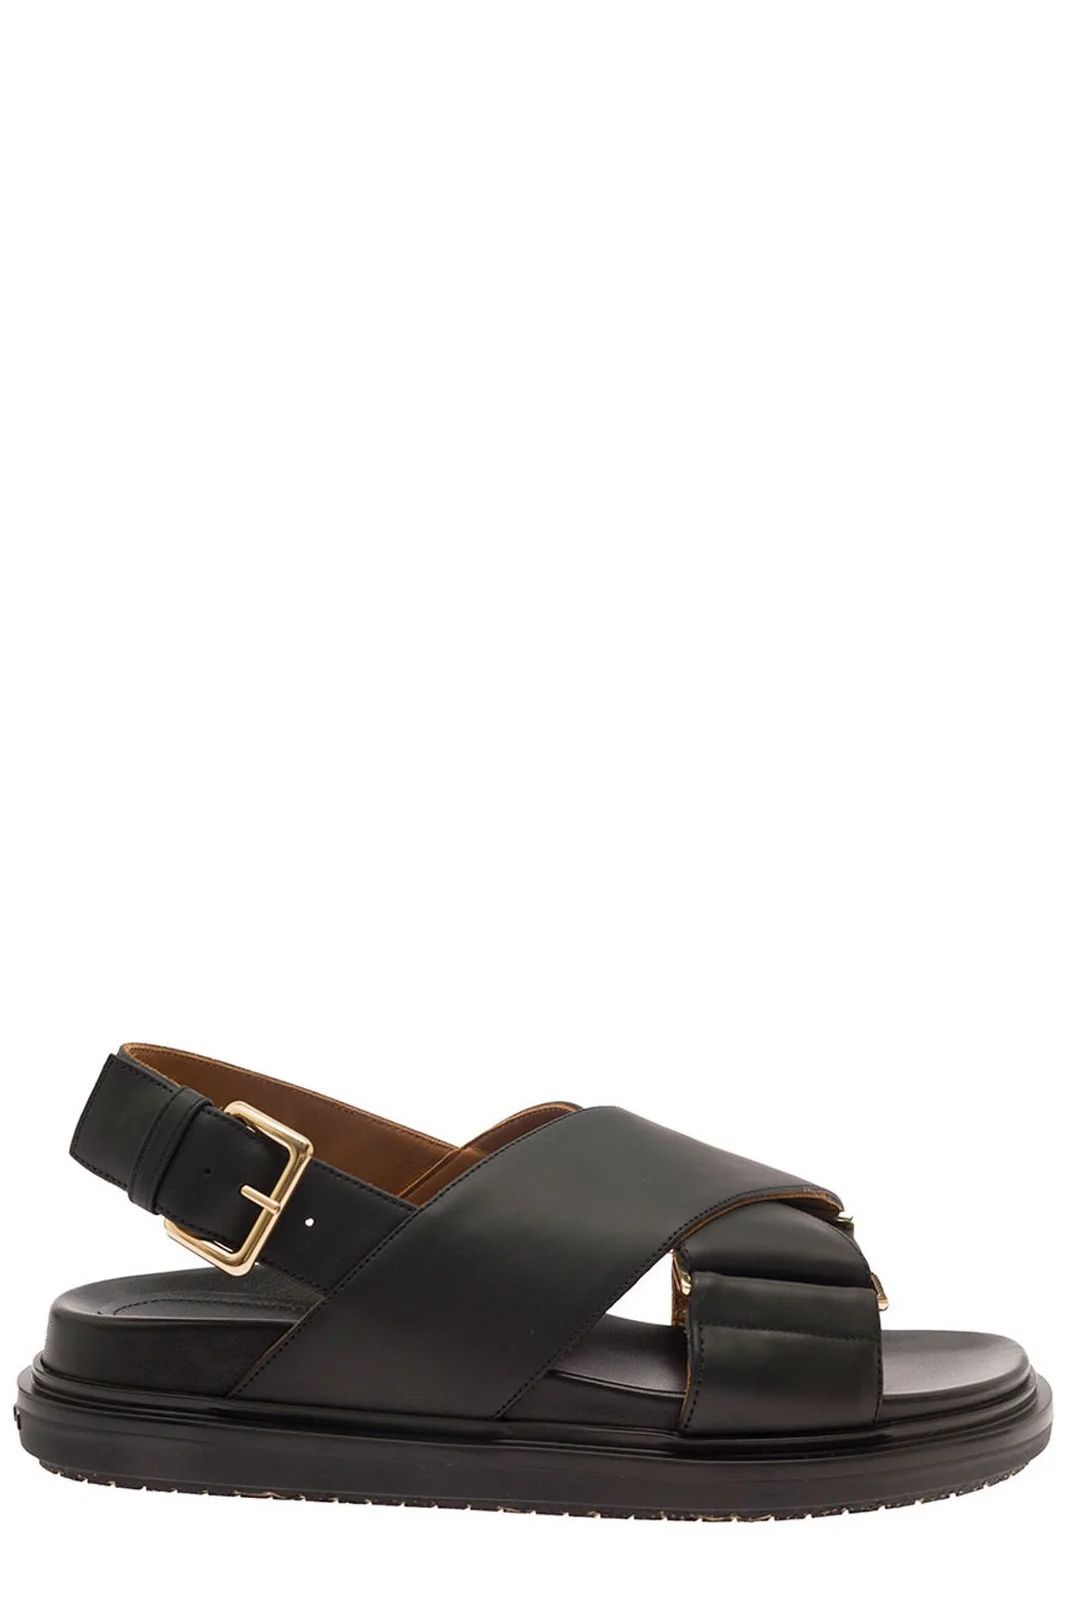 Marni Logo Embossed Buckled Sandals | Cettire Global